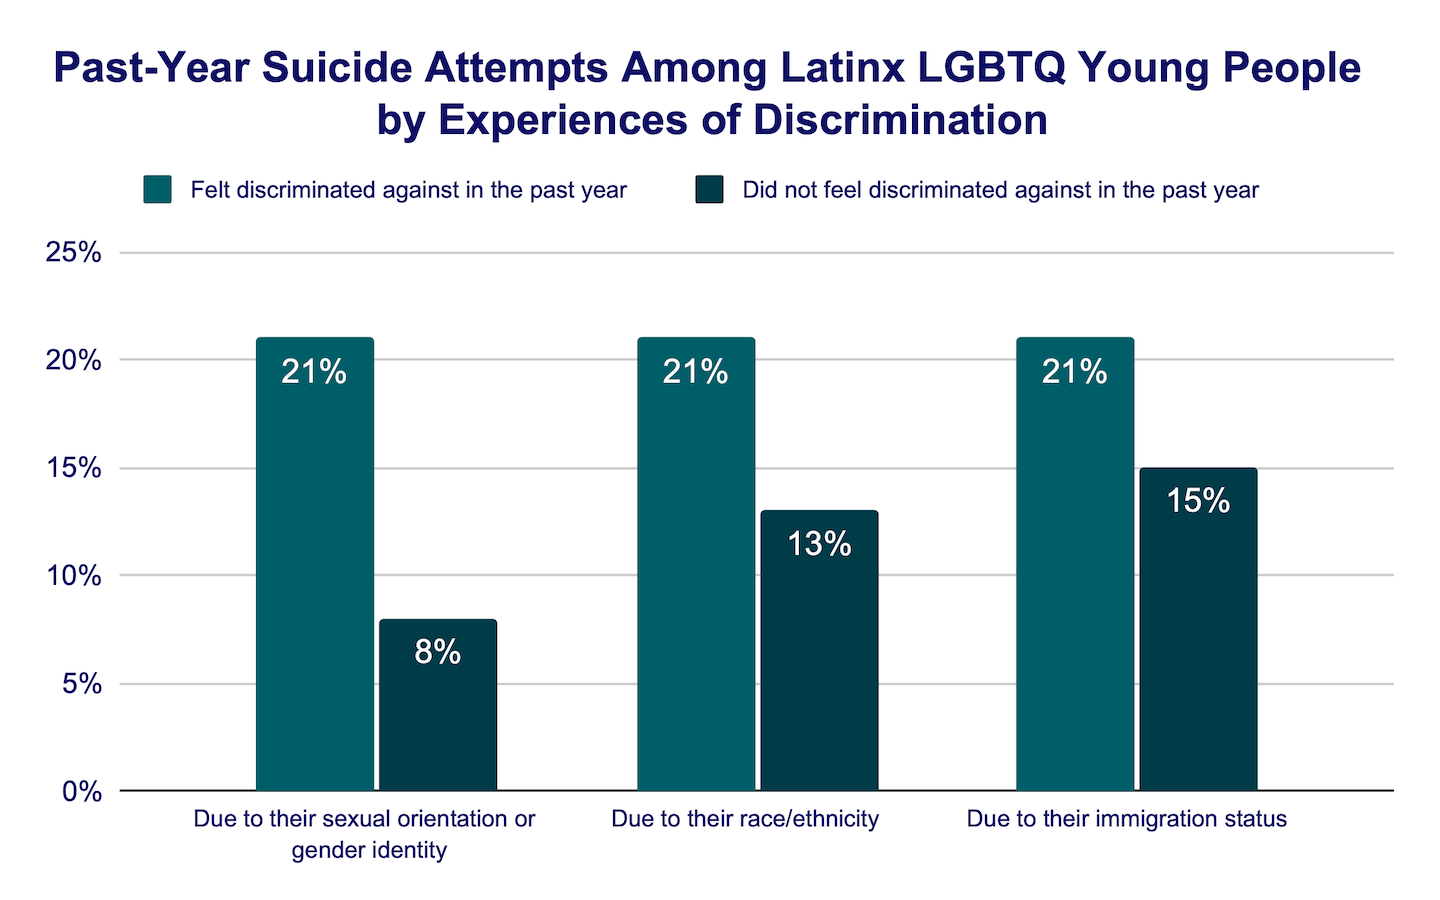 Past-year suicide attempts among Latinx LGBTQ young people by experiences of discrimination bar graph